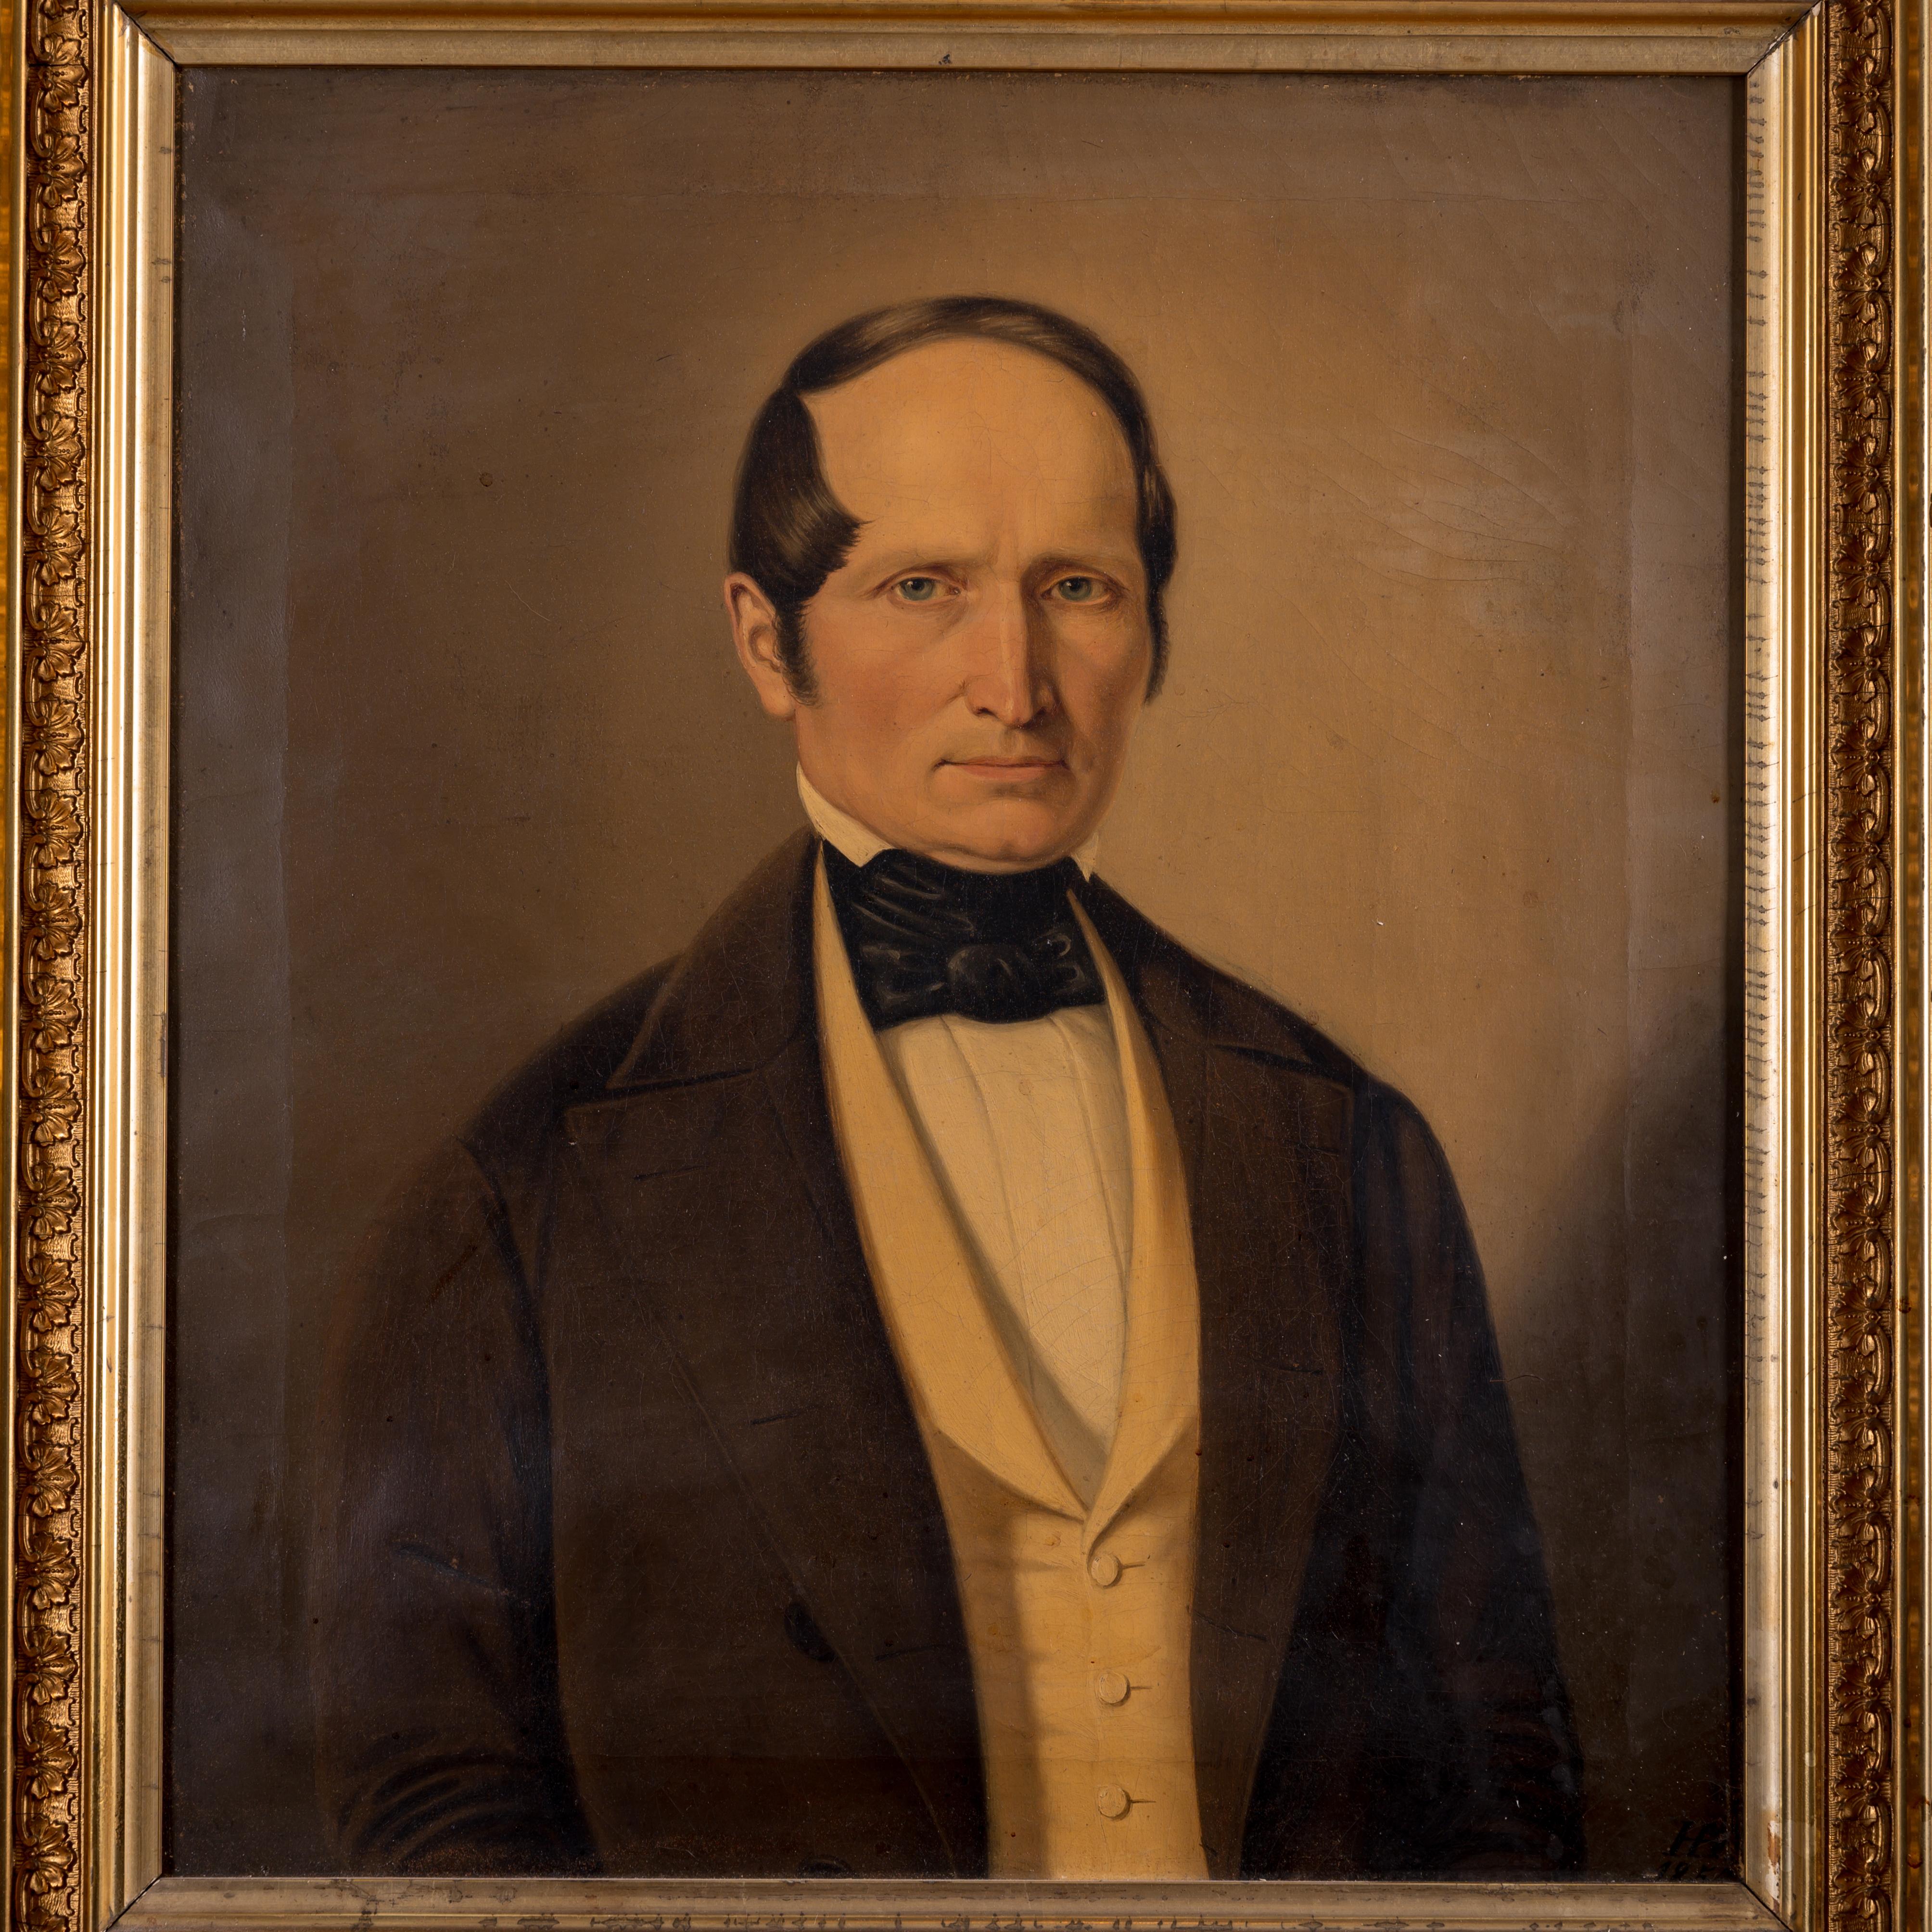 A portrait painting of a New England gentleman signed H.H. and dated 1854.  
The gentleman is believed to be William Mueller of Mendon, Mass and later Meridon Connecticut.

sight: 18 ½ by 21 ½ inches
frame: 26 ¾ by 29 ½ inches

